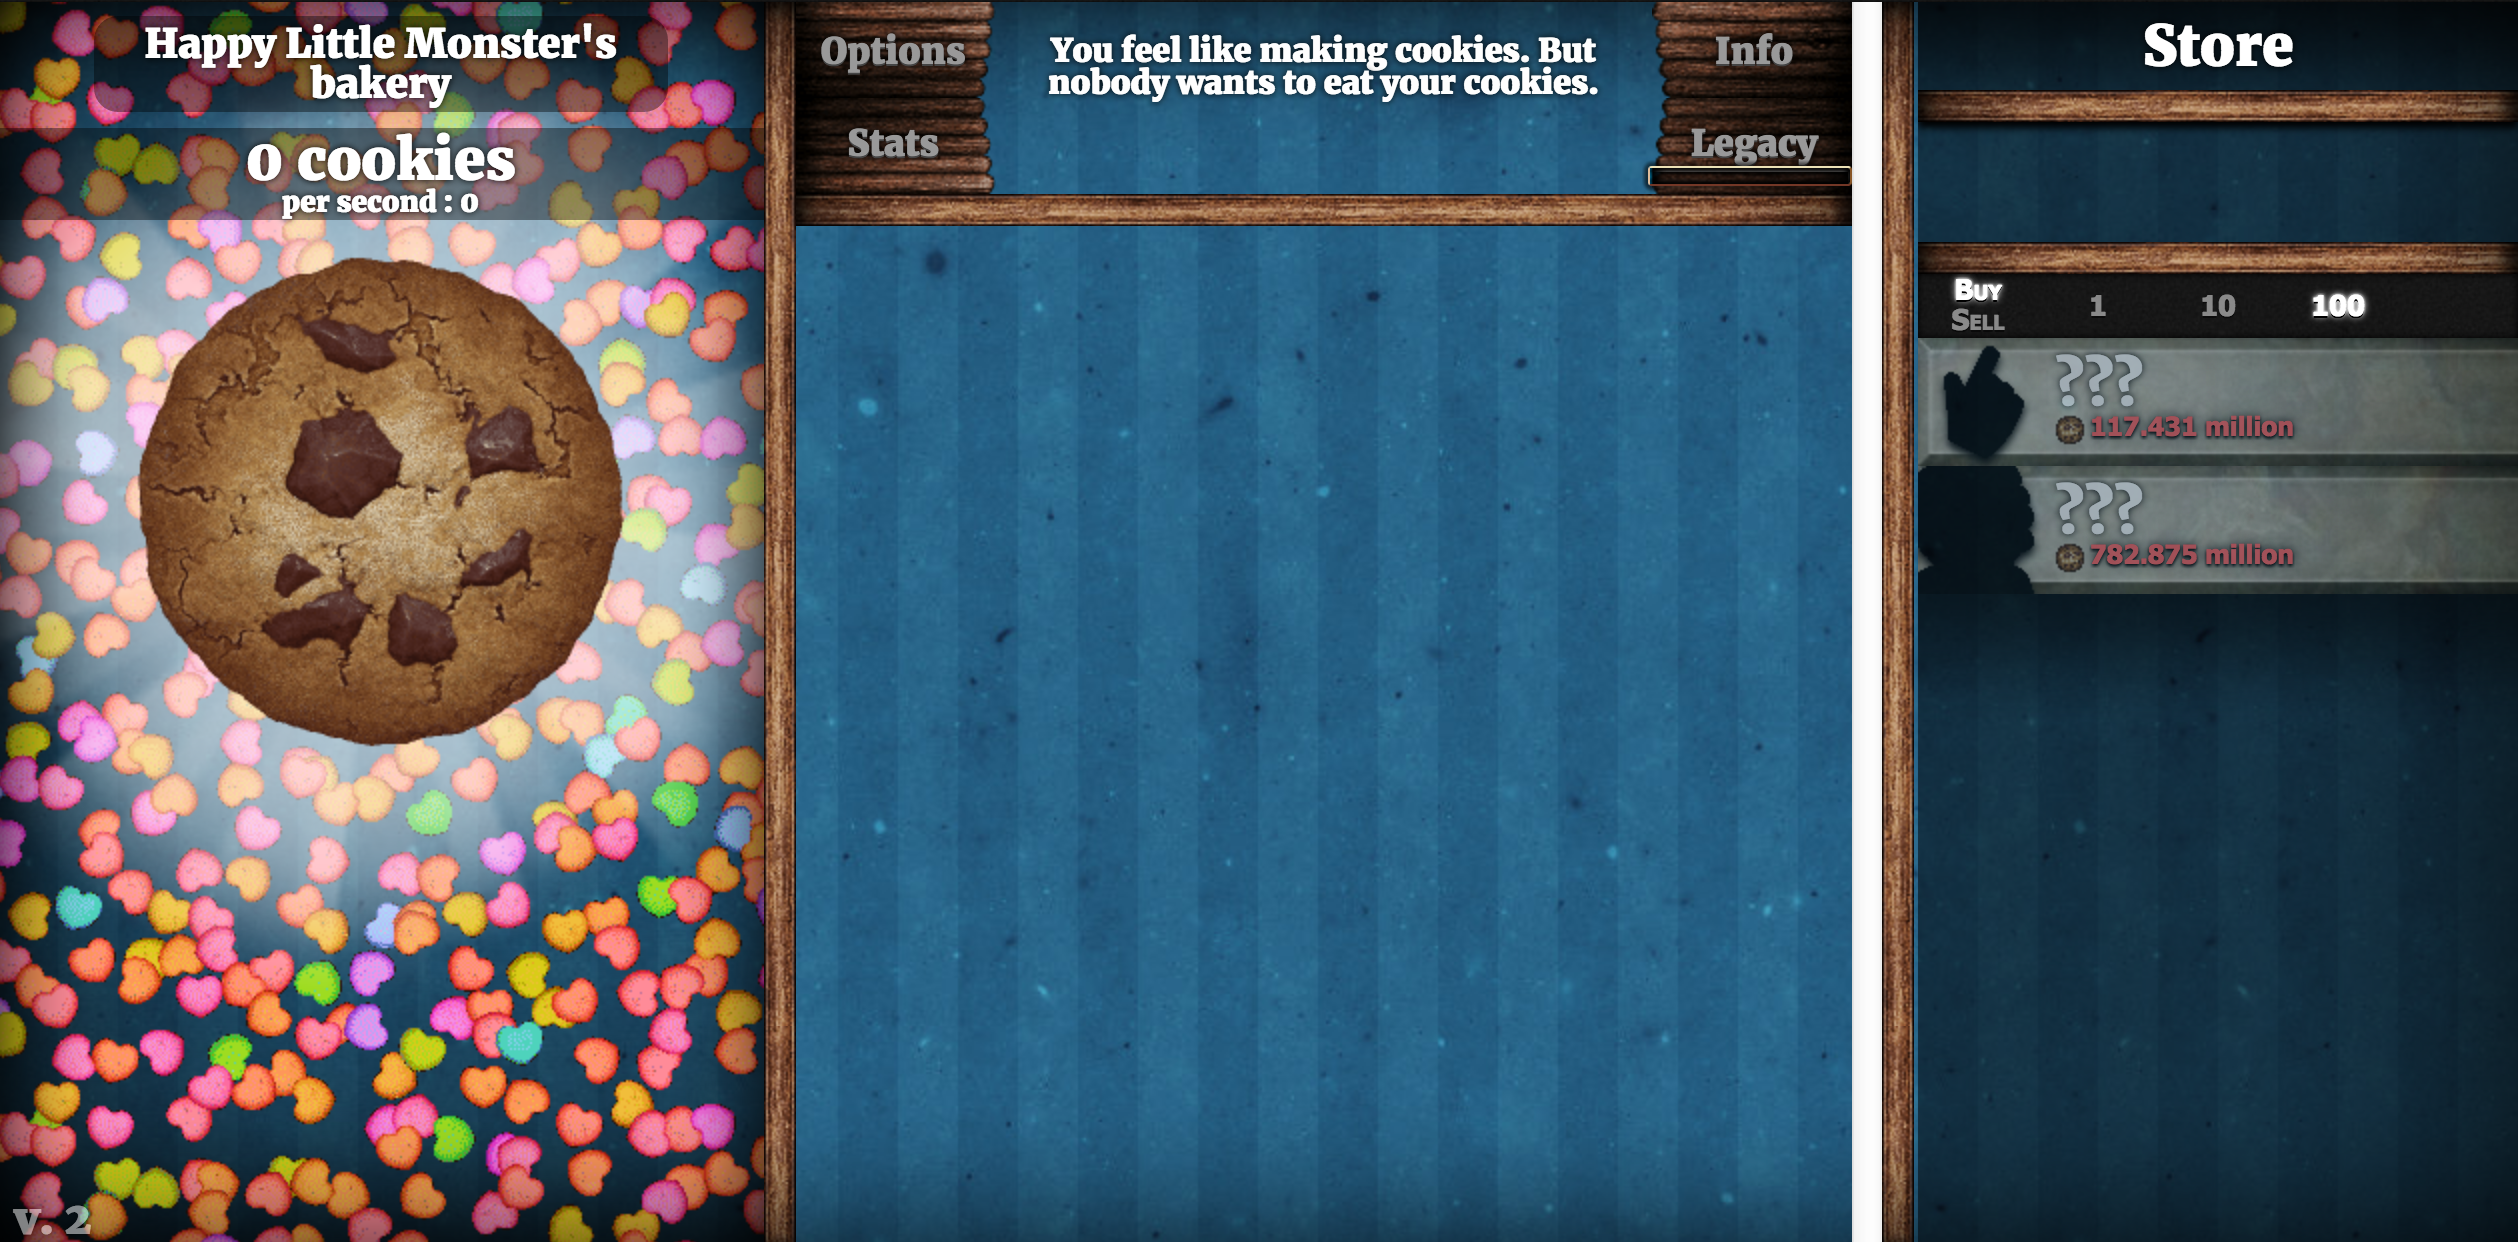 Cookie Clicker v.2 ushers in huge changes, but there are still